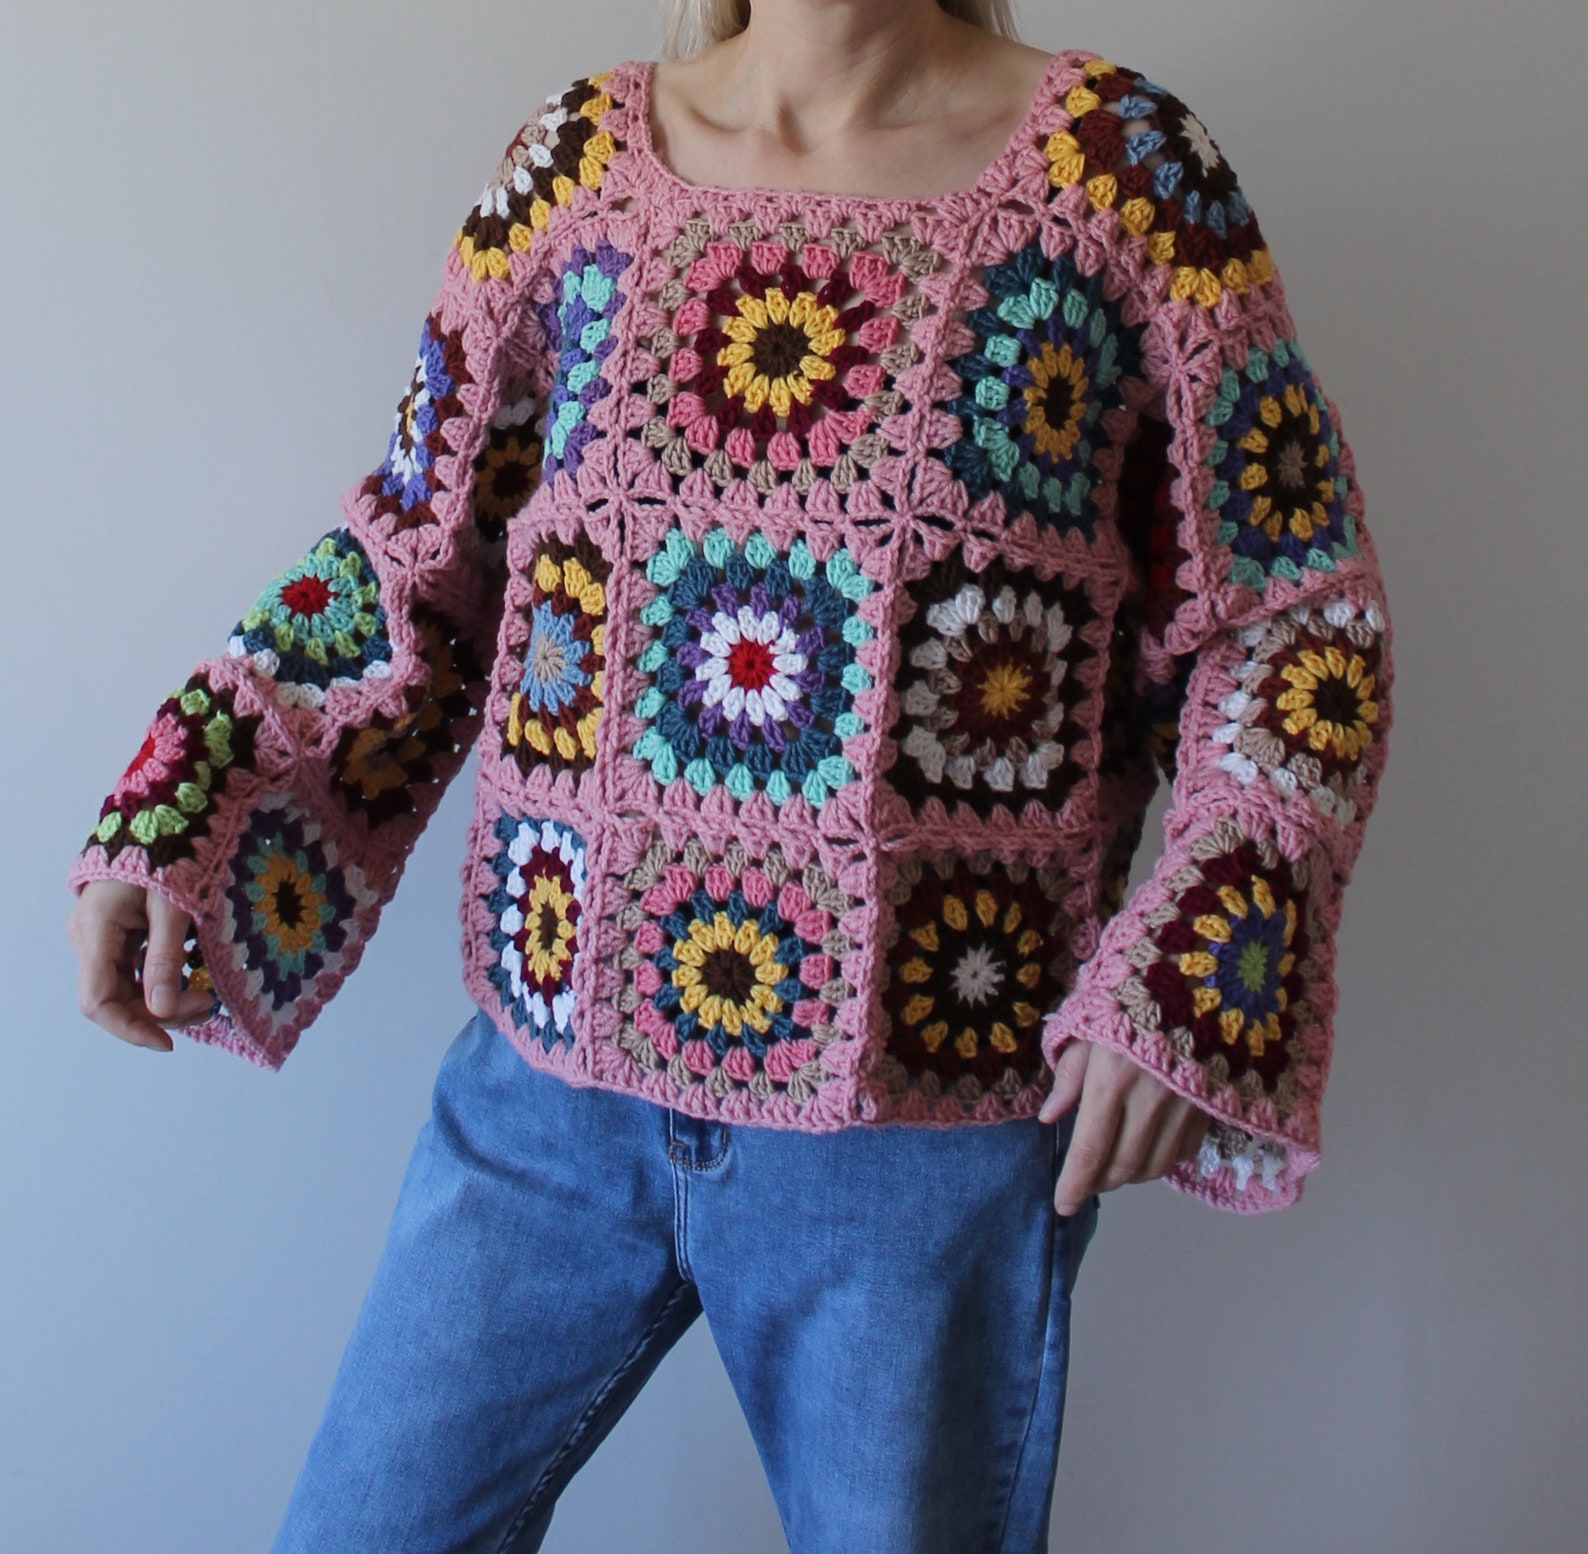 Granny Square Sweater Crochet Sweater Knitted Oversized - Etsy